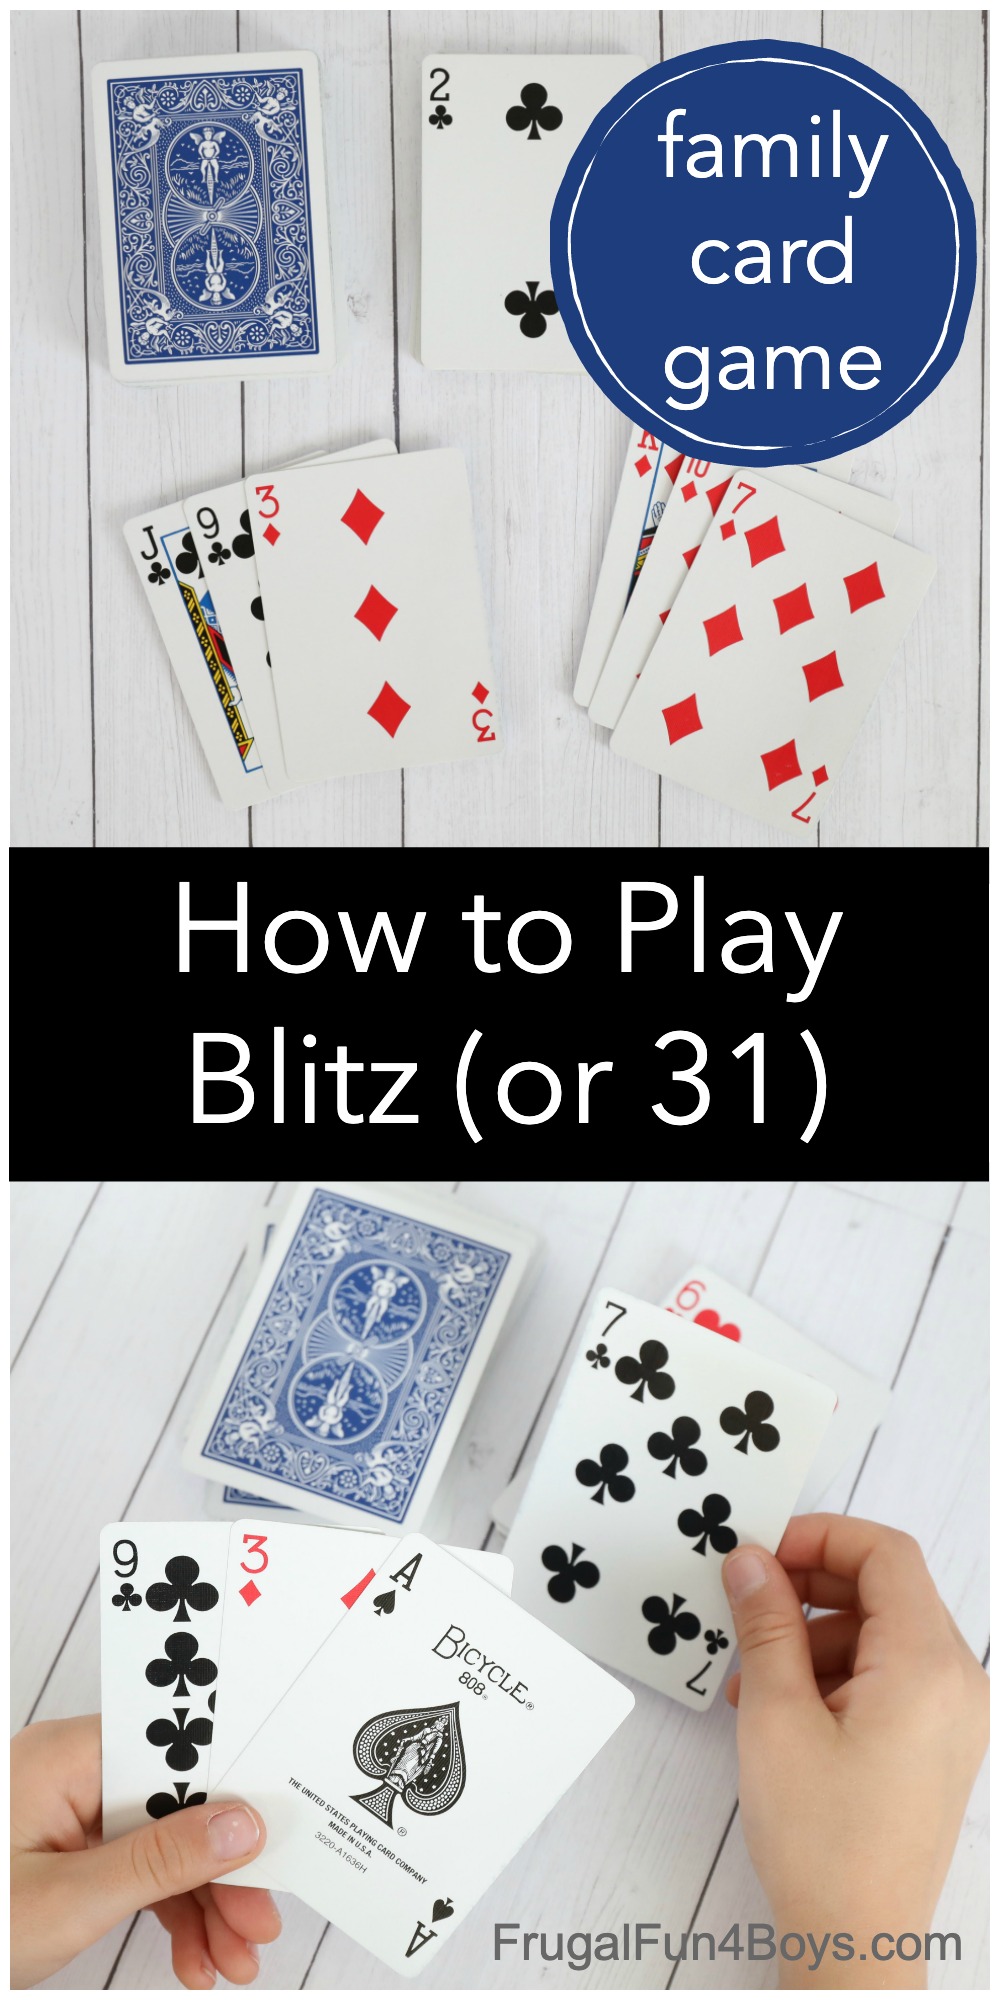 How to play blitz card game